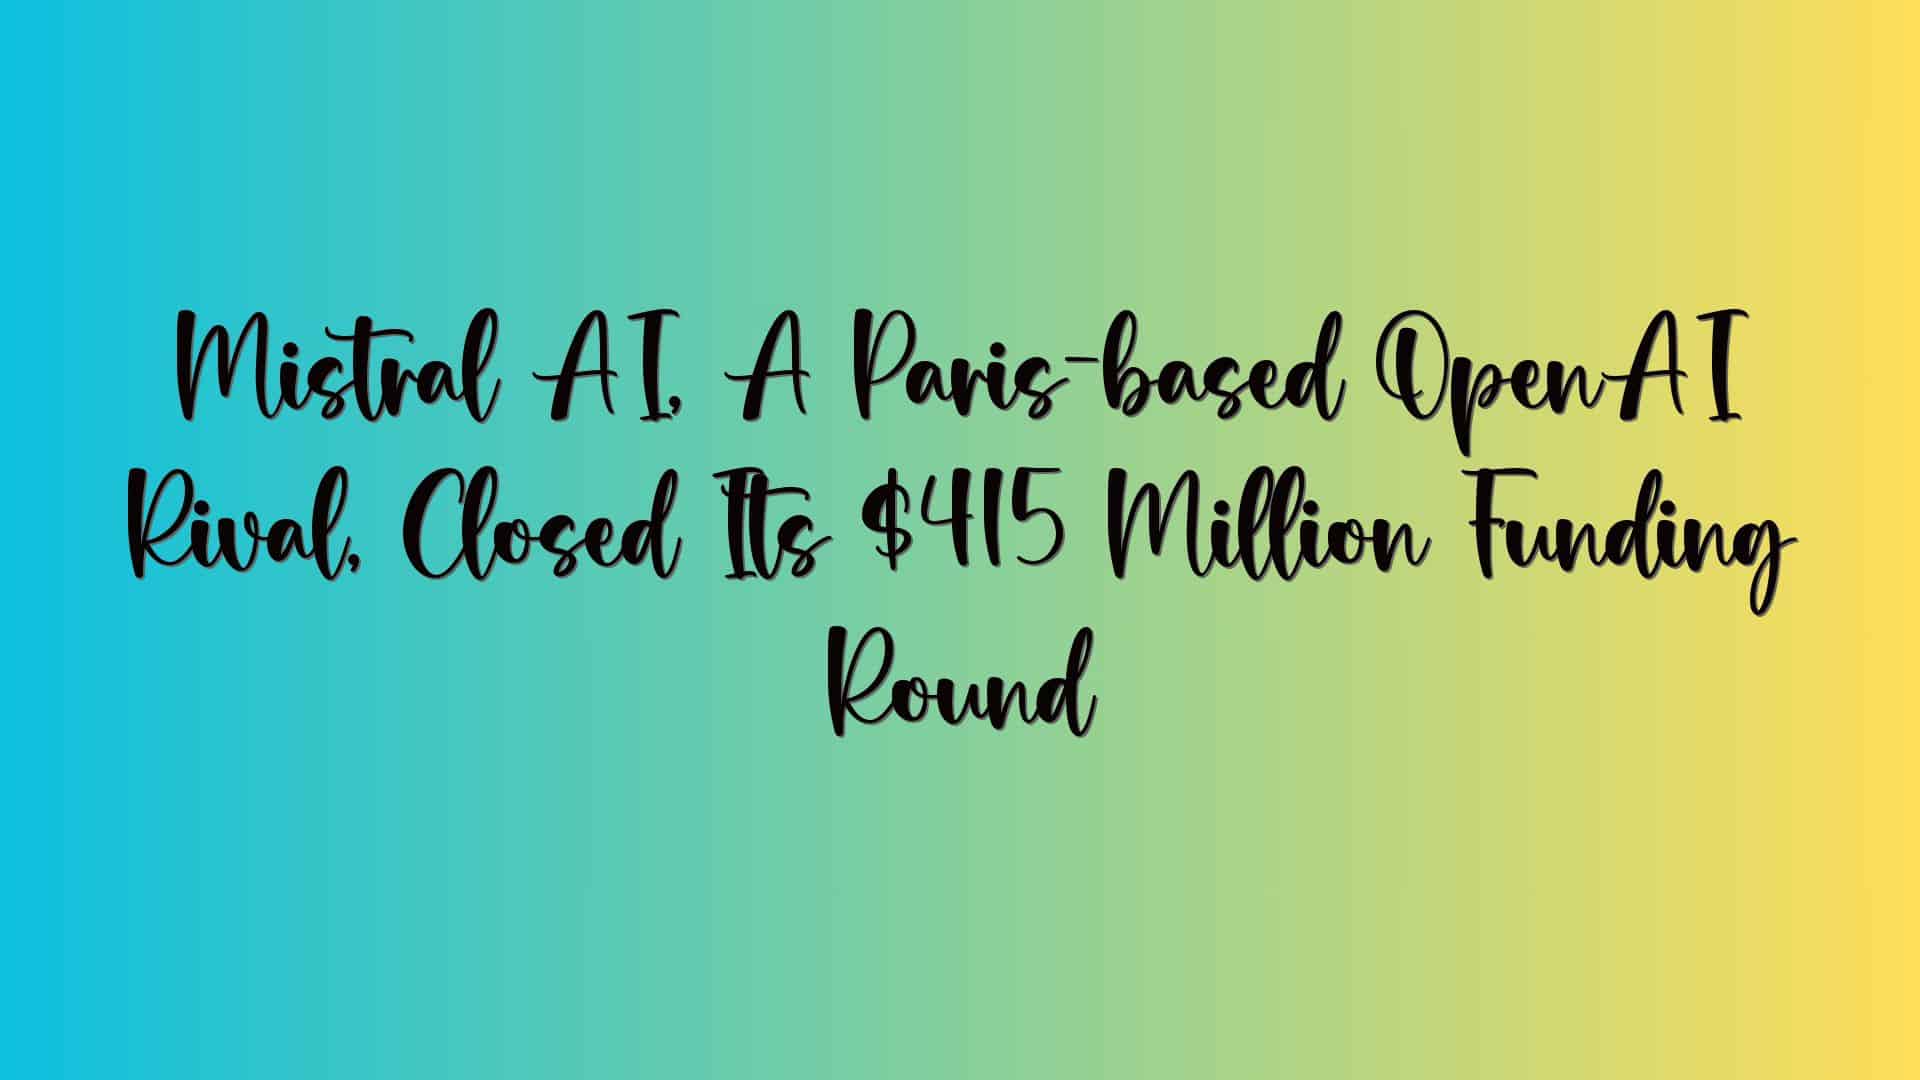 Mistral AI, A Paris-based OpenAI Rival, Closed Its $415 Million Funding Round